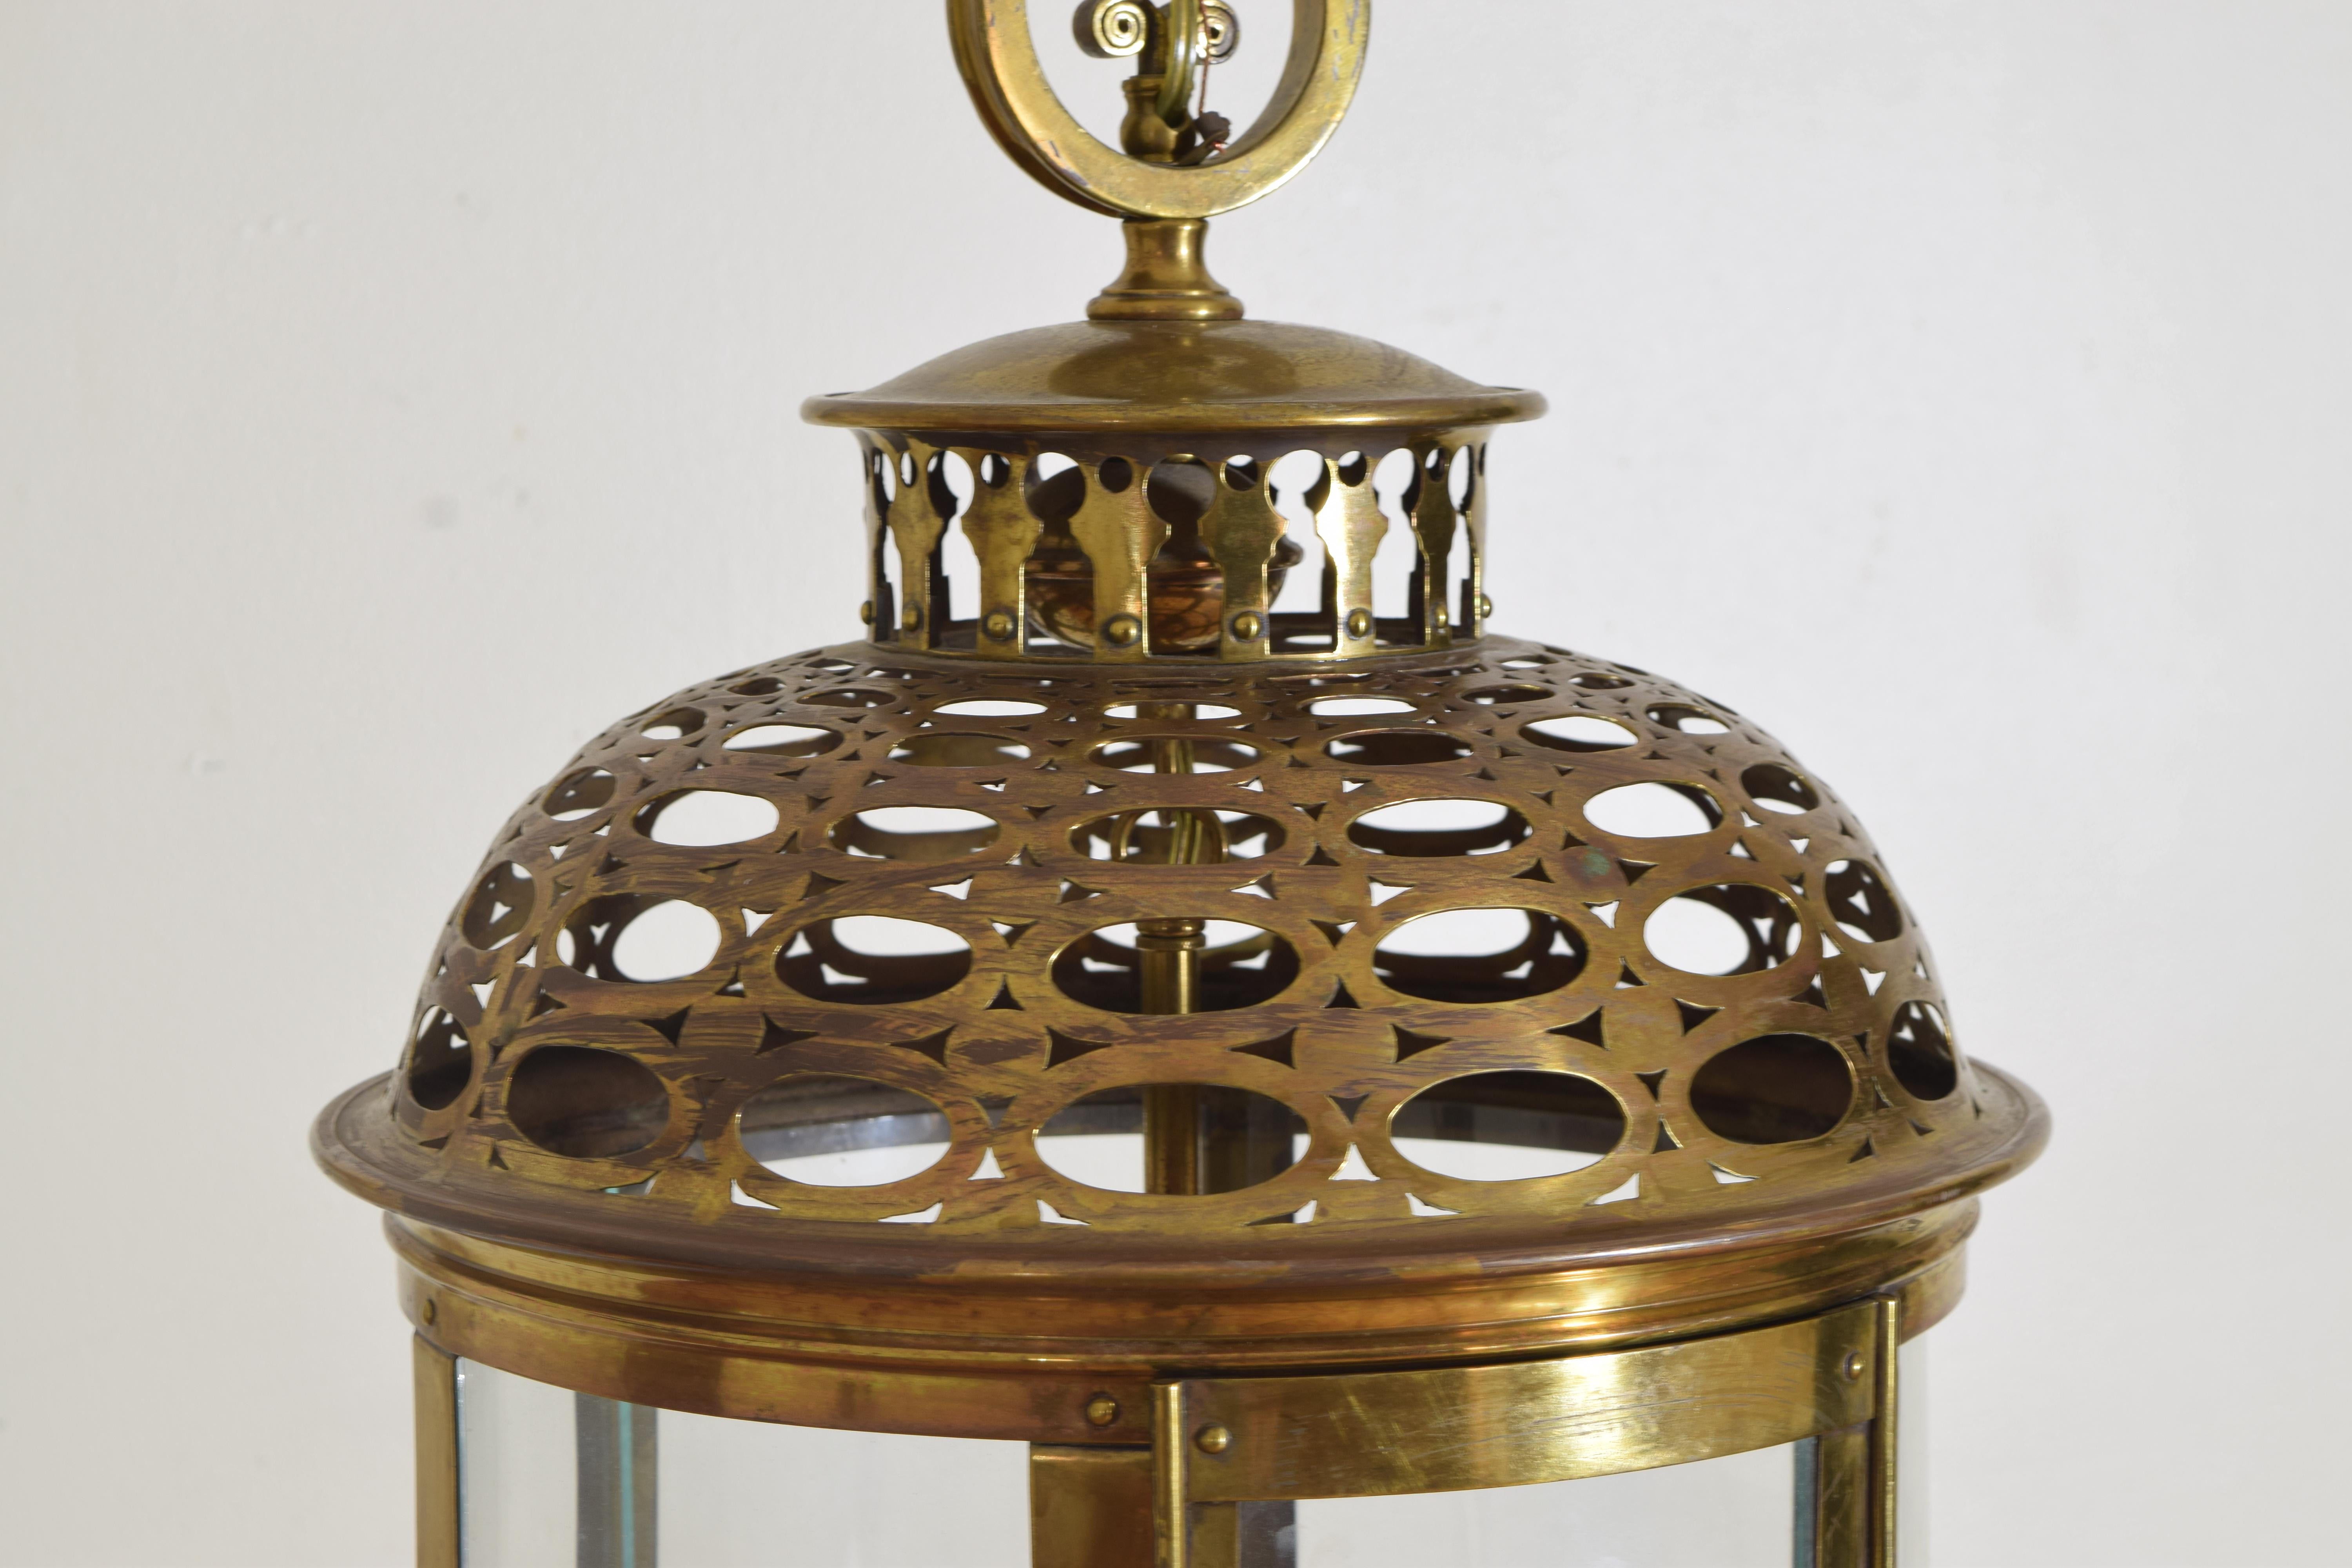 European Continental Reticulated Brass Dome Shaped 3-Light Lantern, Early 20th Century